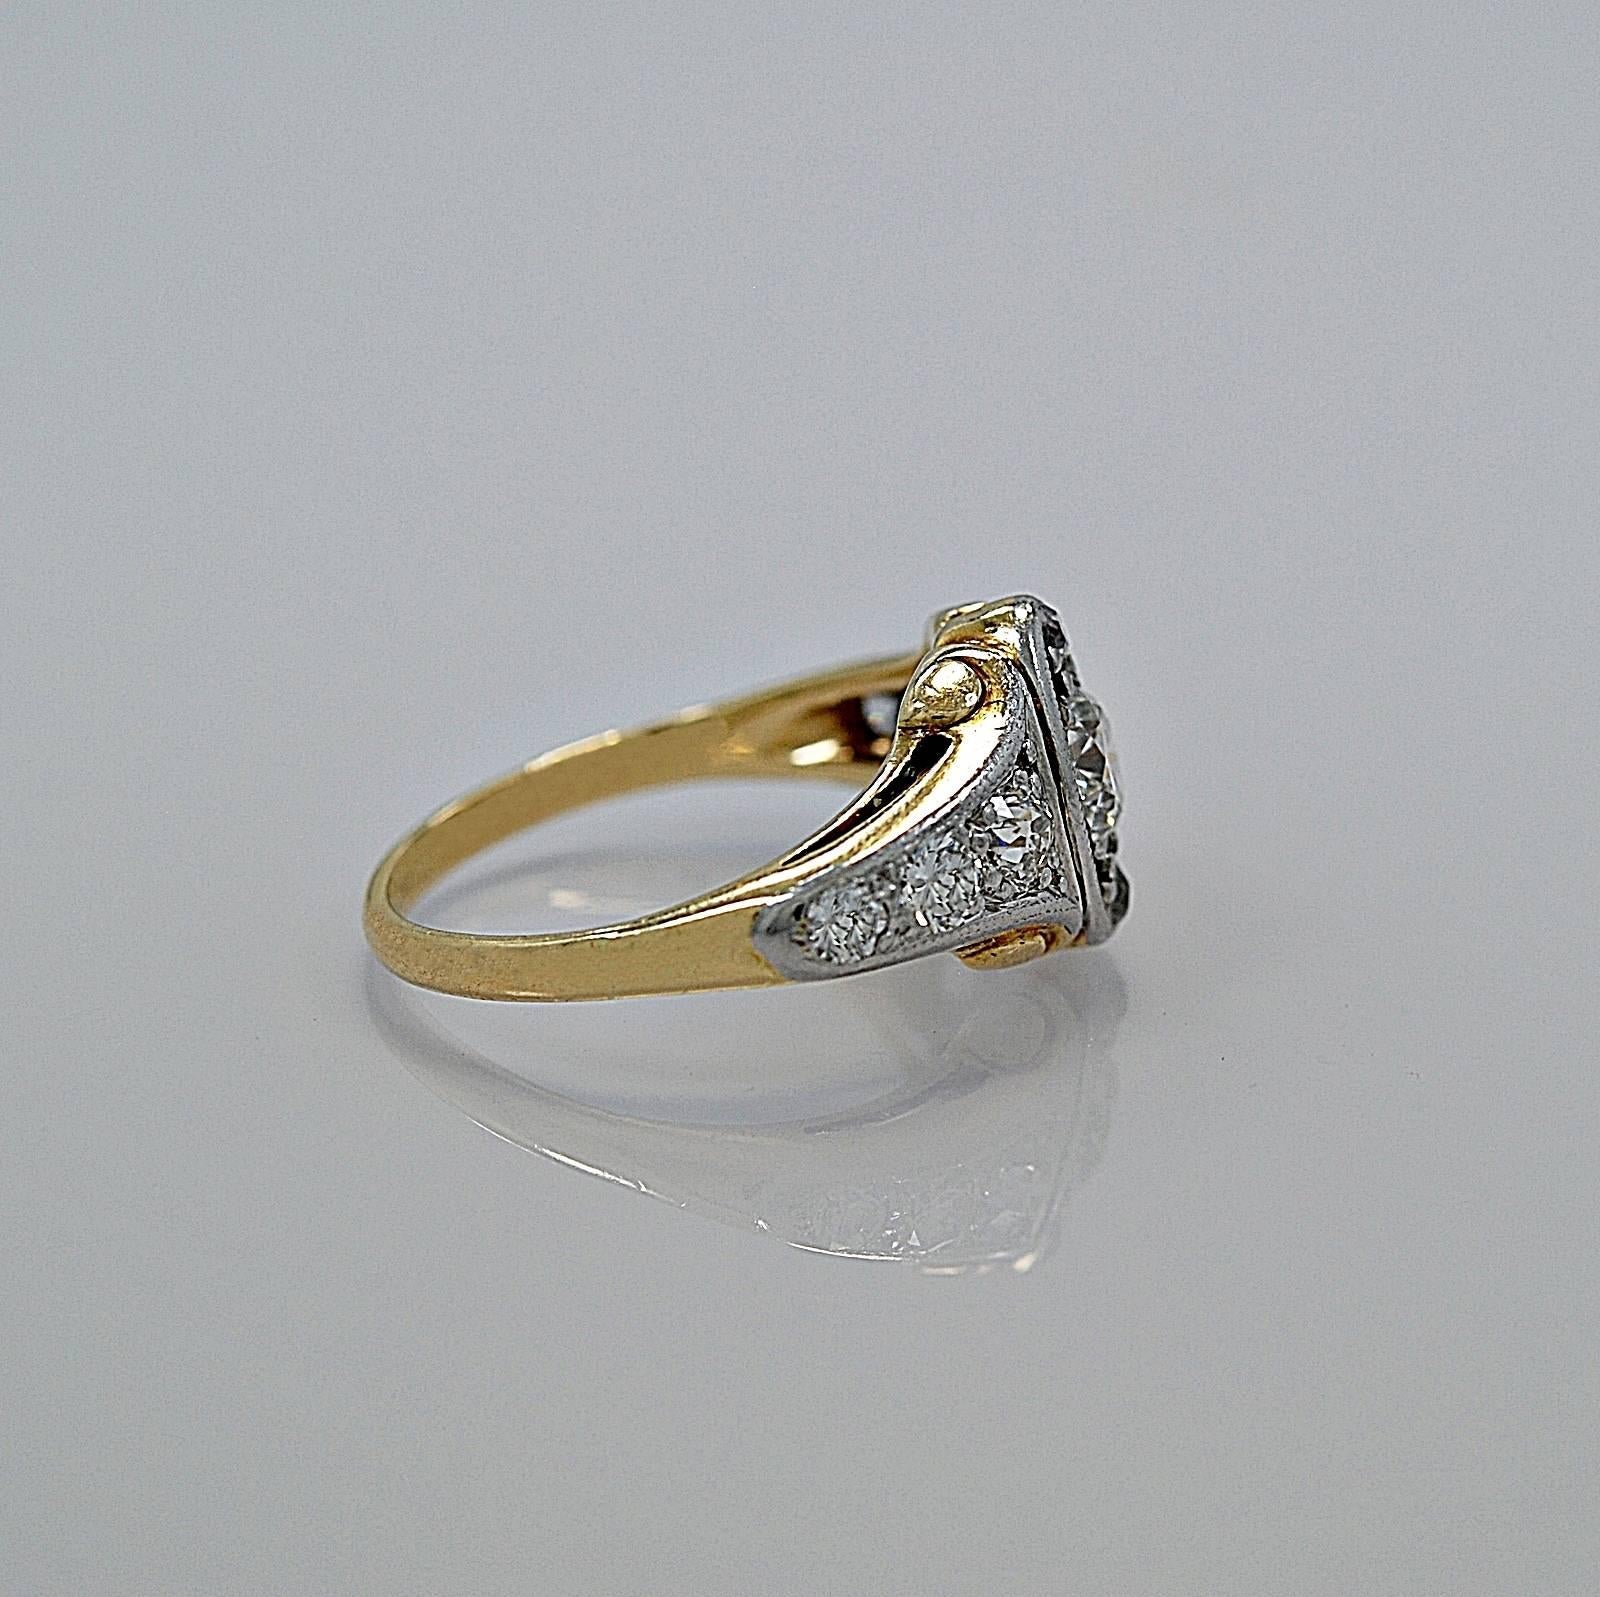 In our Tampa store, this item has a retail price of $6,595.

This Art Deco 14K/18K White/Yellow Gold diamond engagement ring features a .60ct. apx. center diamond with diamond melee on the top and bottom to give the illusion of a marquise shape